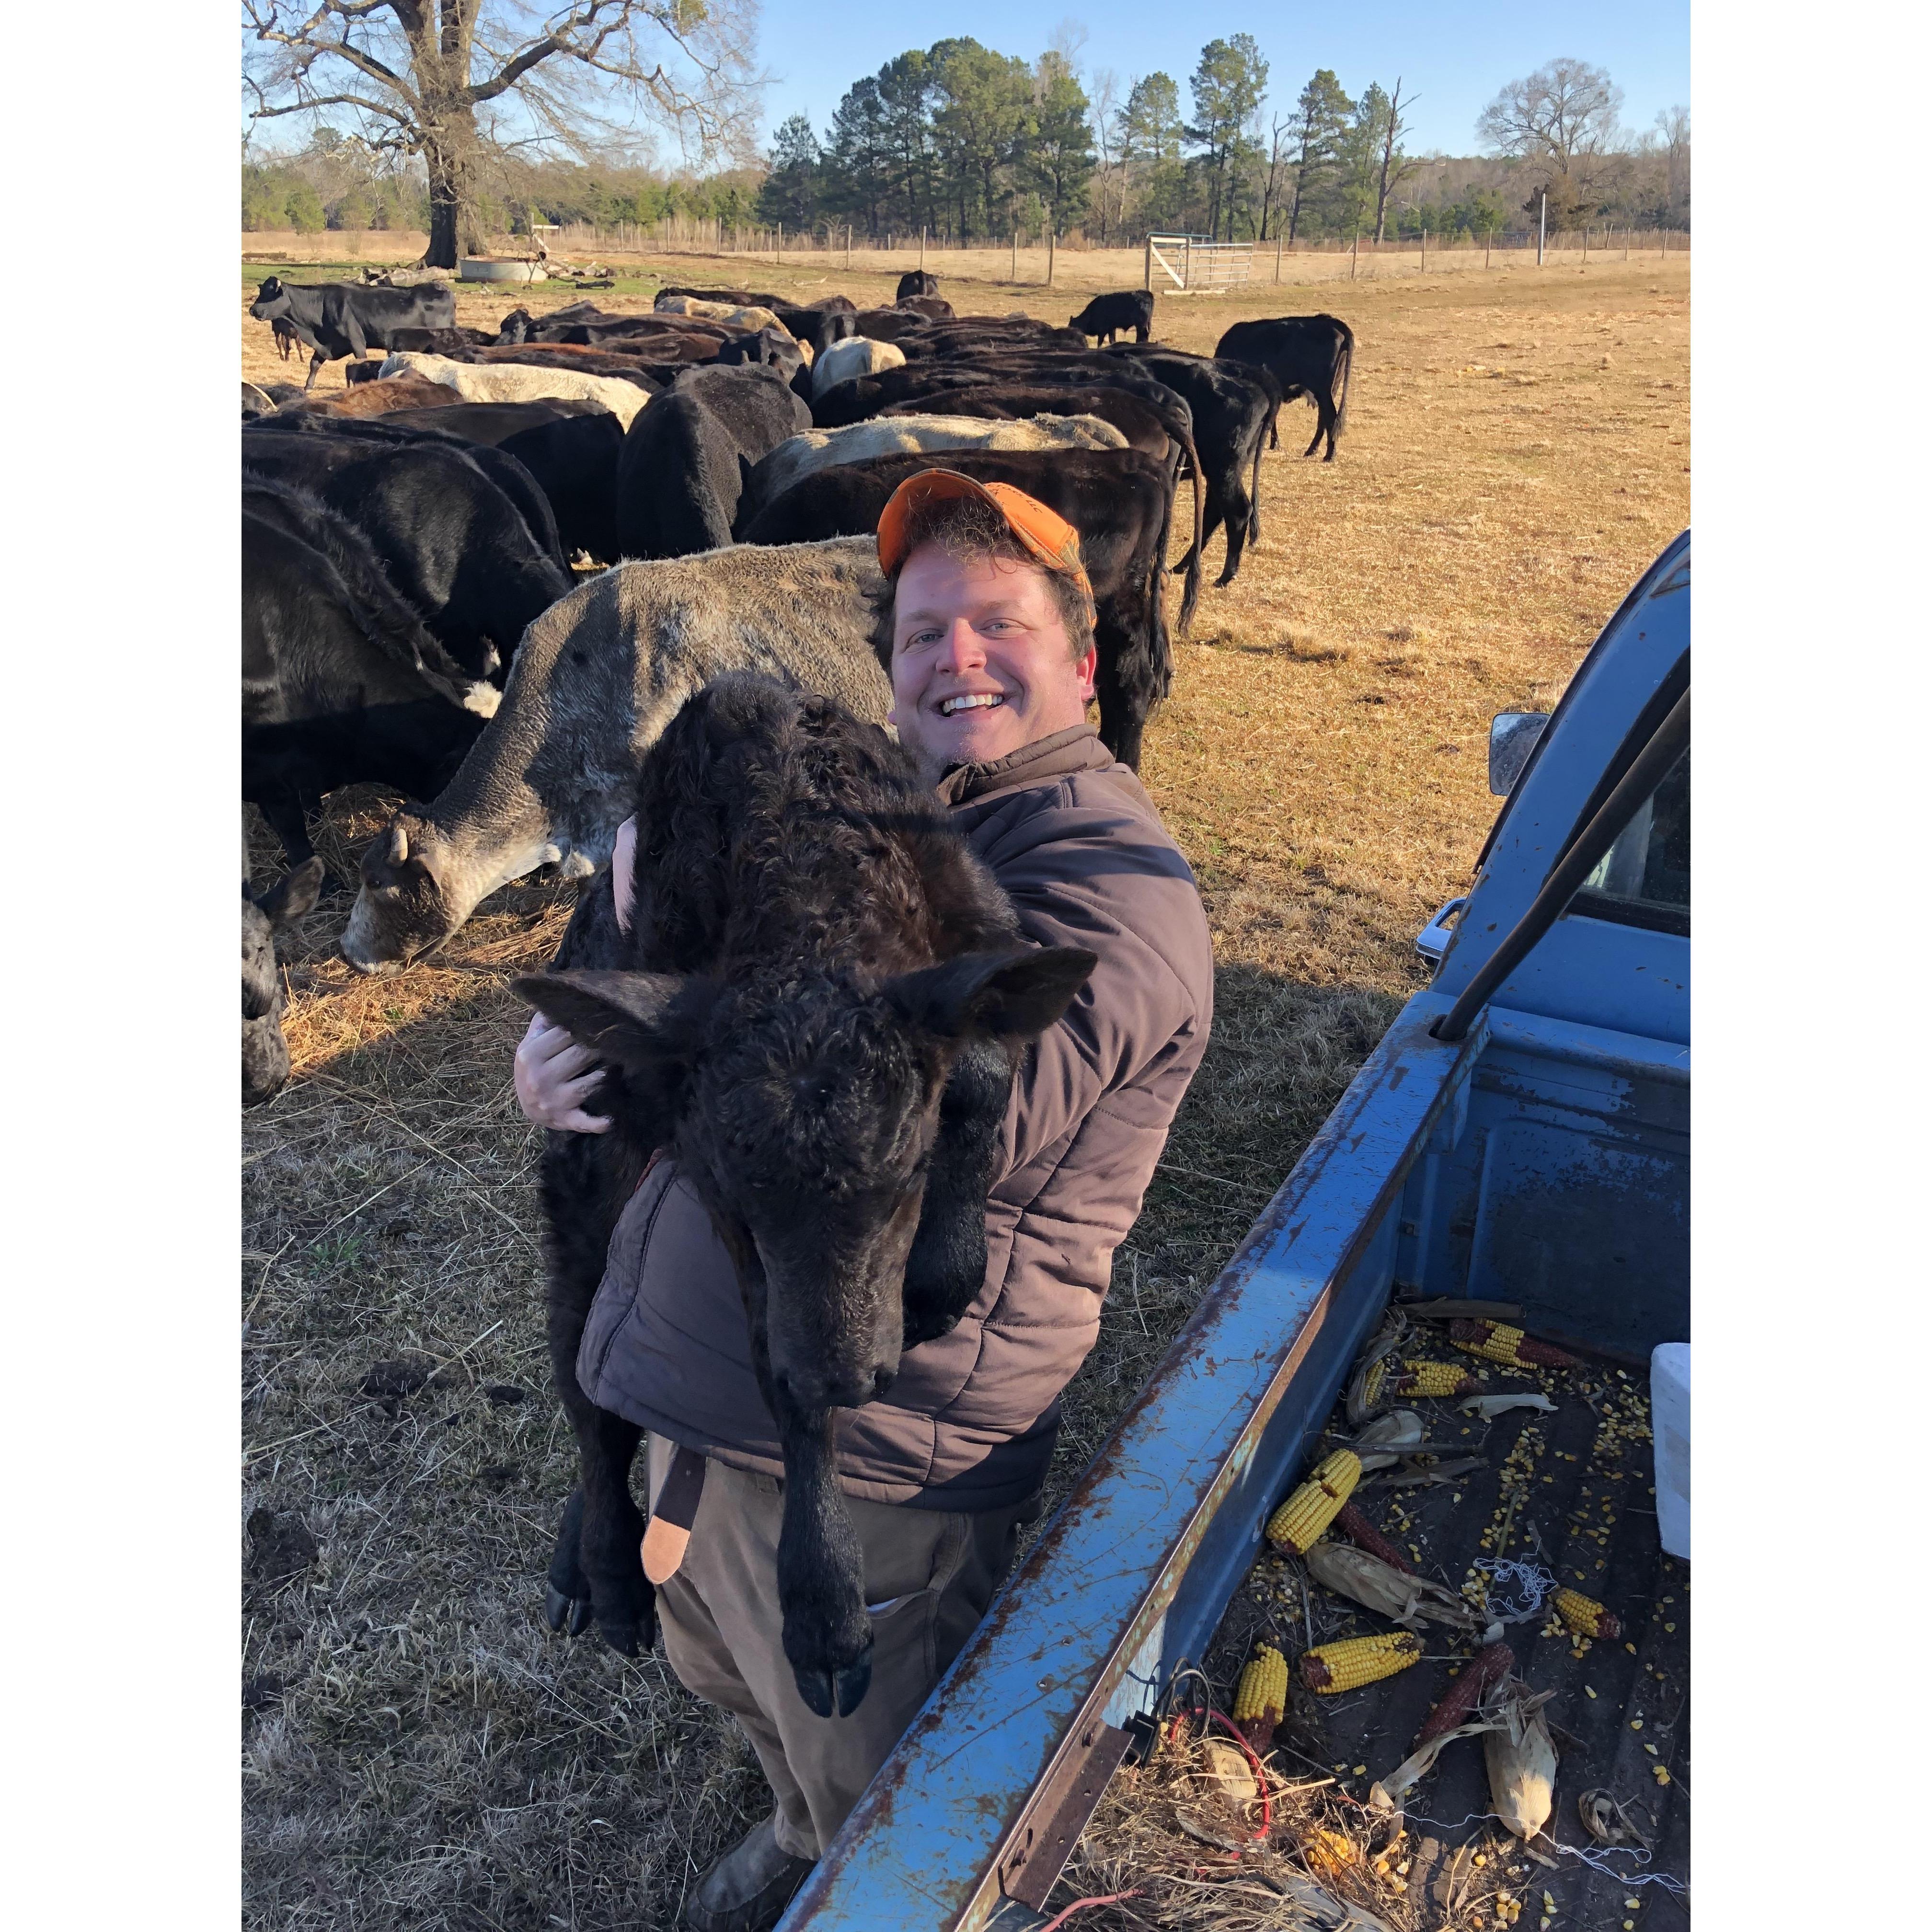 Picking up the baby cows! - February 2022